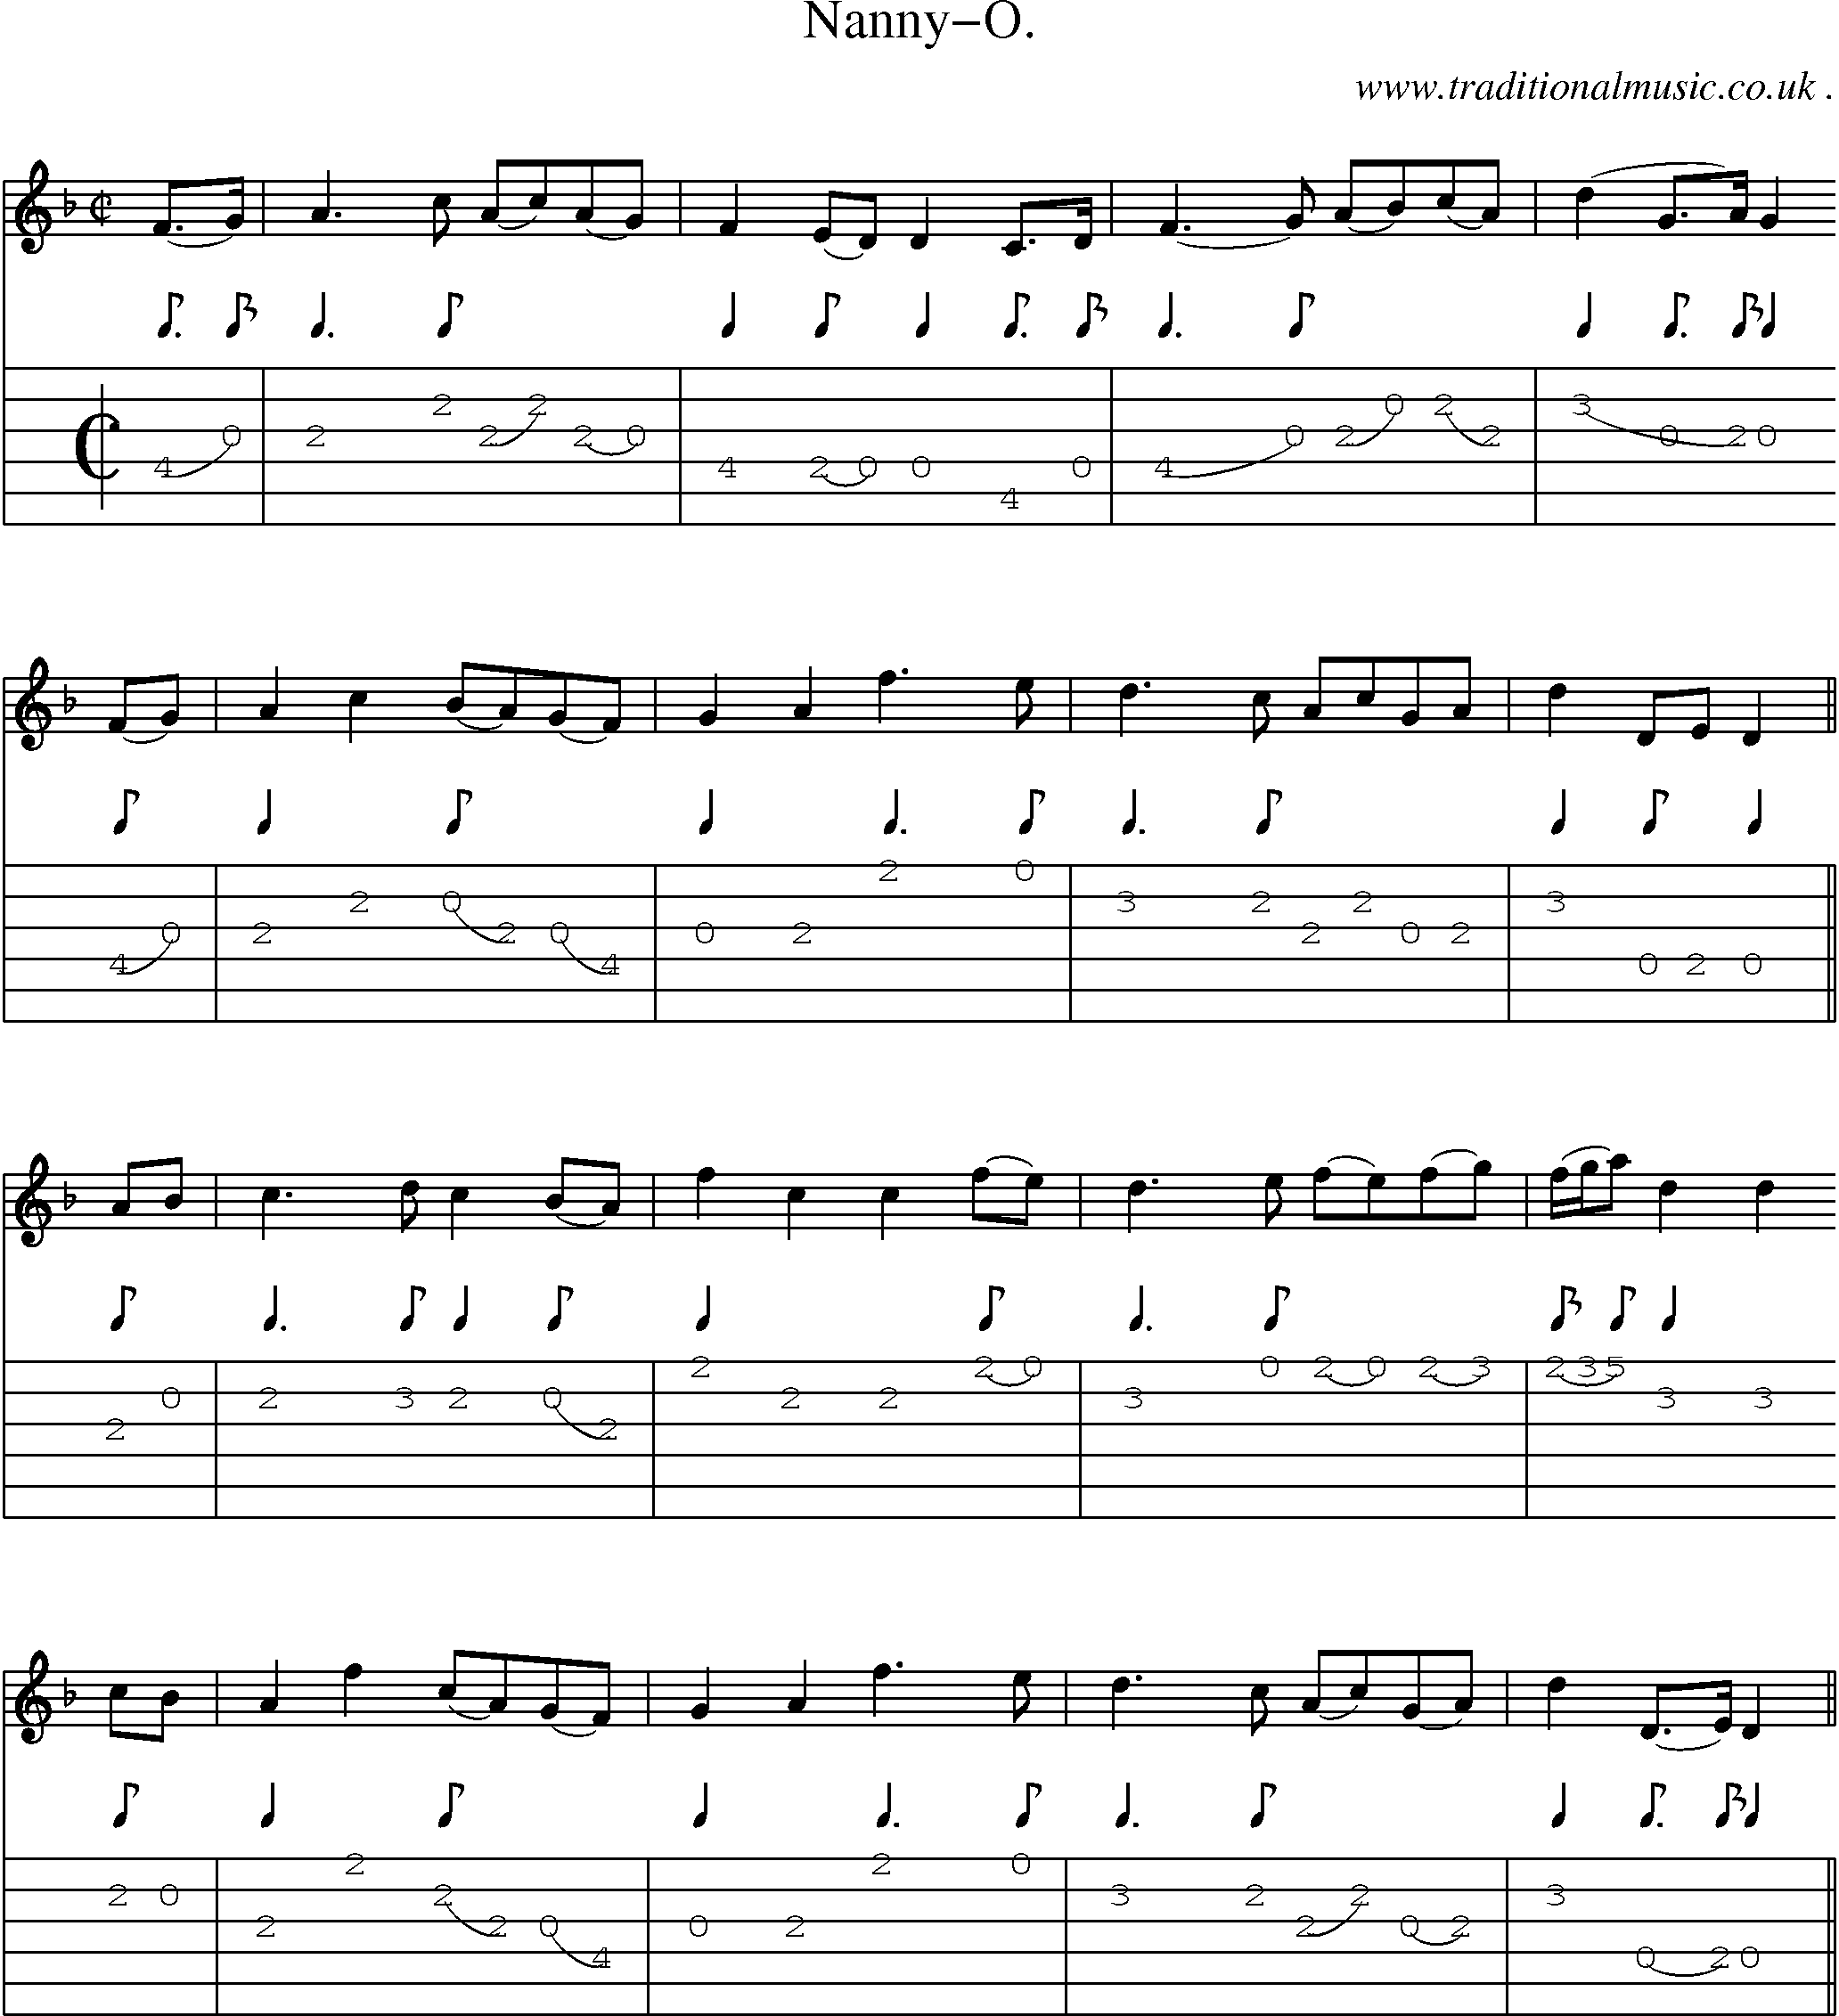 Sheet-Music and Guitar Tabs for Nanny-o